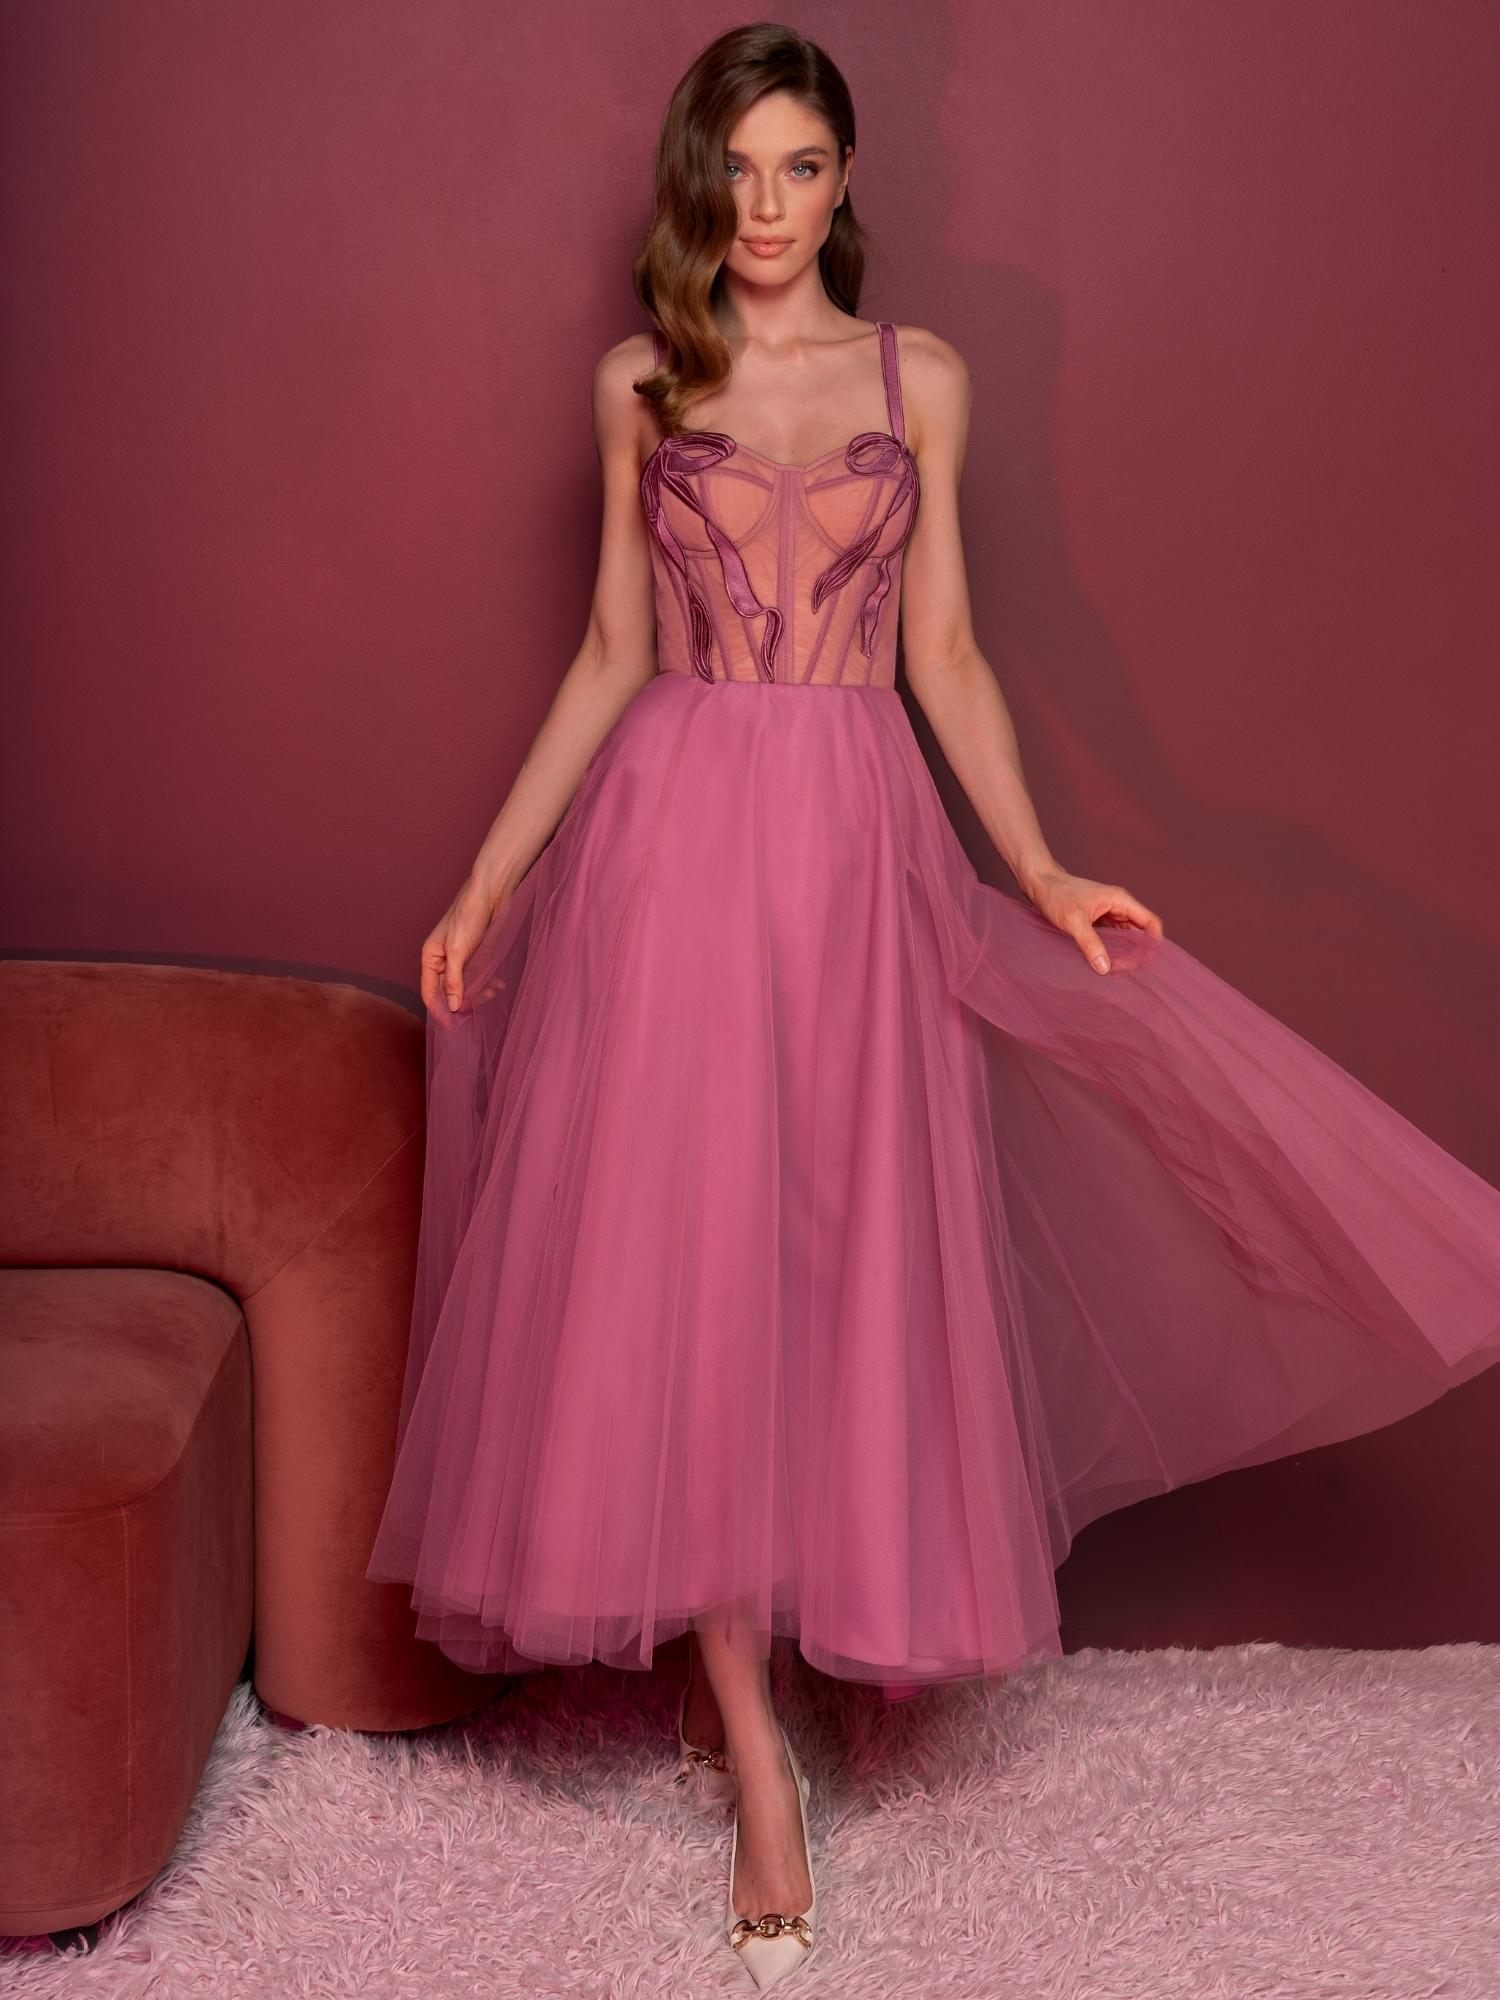 Tea-length A-line gown with a bustier style bodice